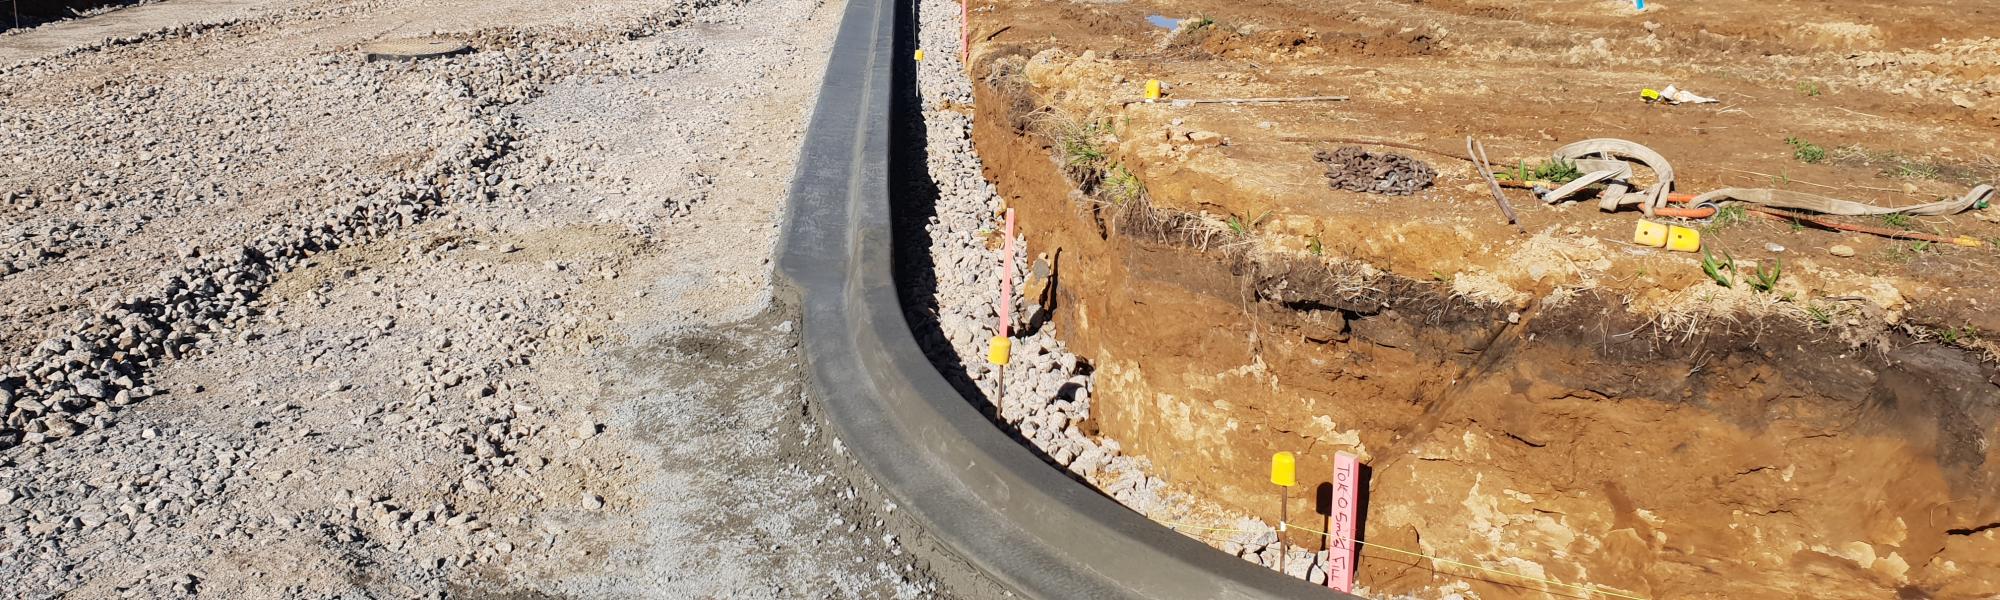 Commercial roading services - kerb design and construction